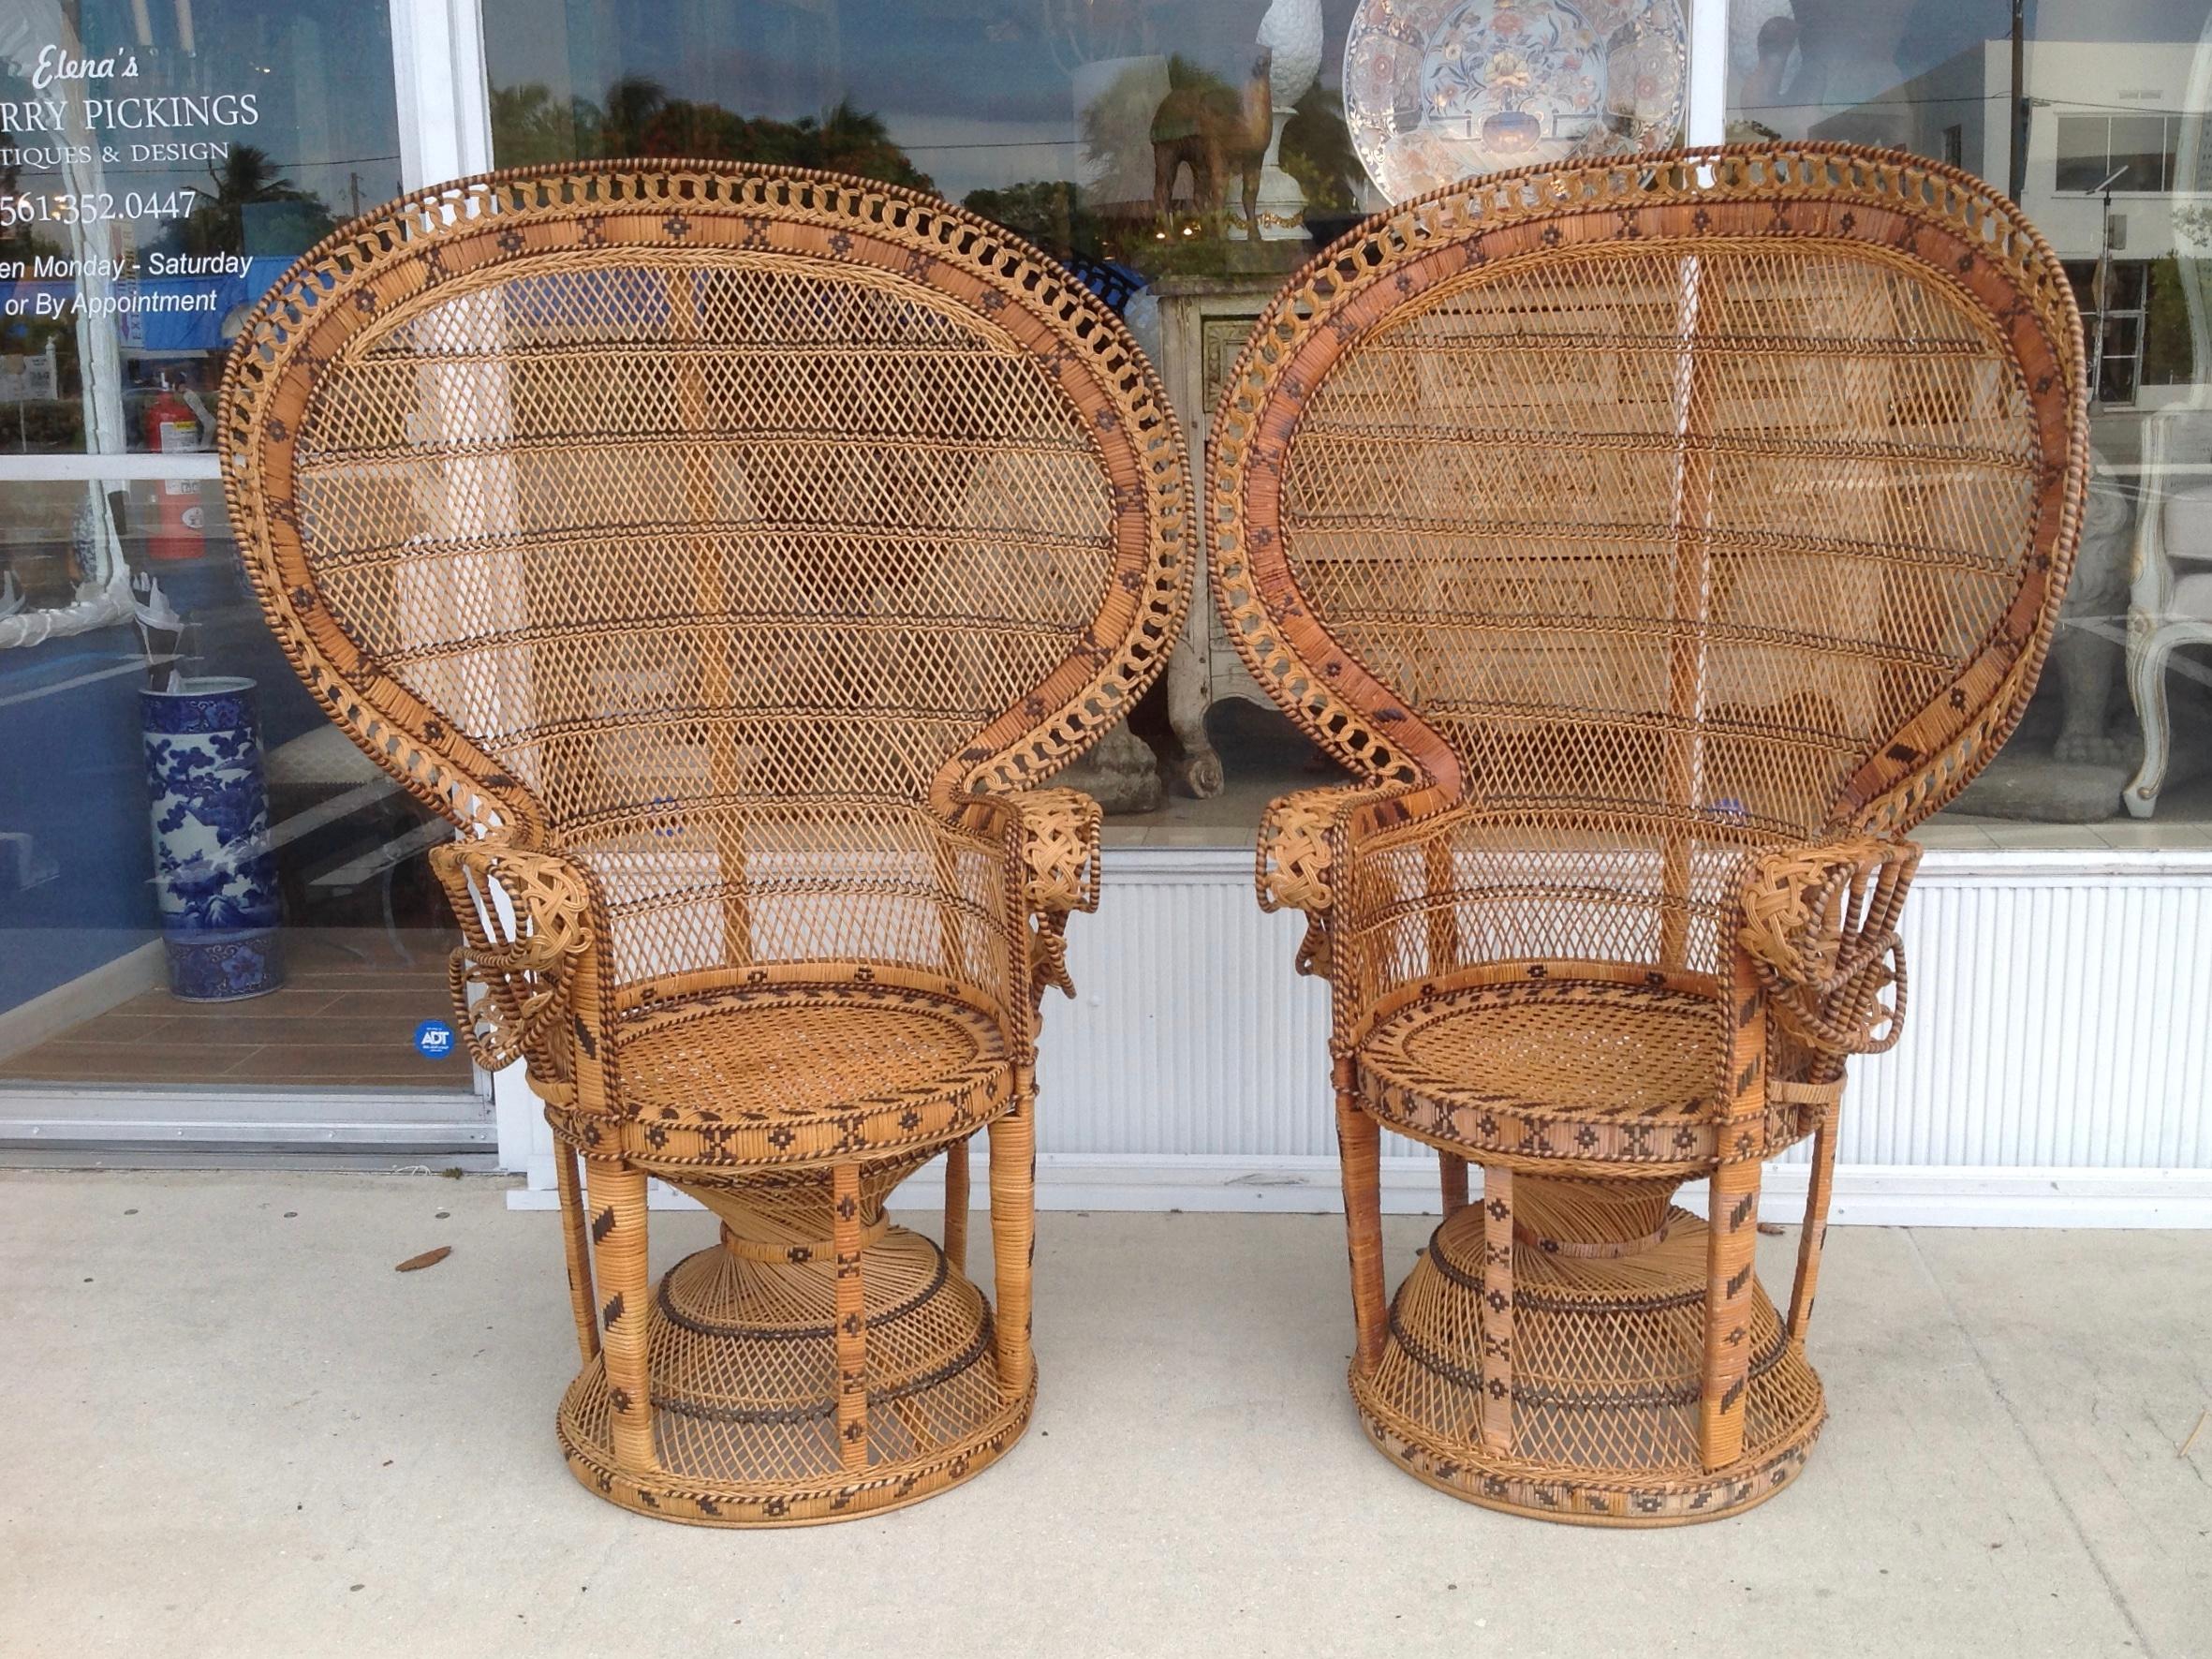 Hong Kong Pair of Decorated Woven Rattan Peacock Chairs